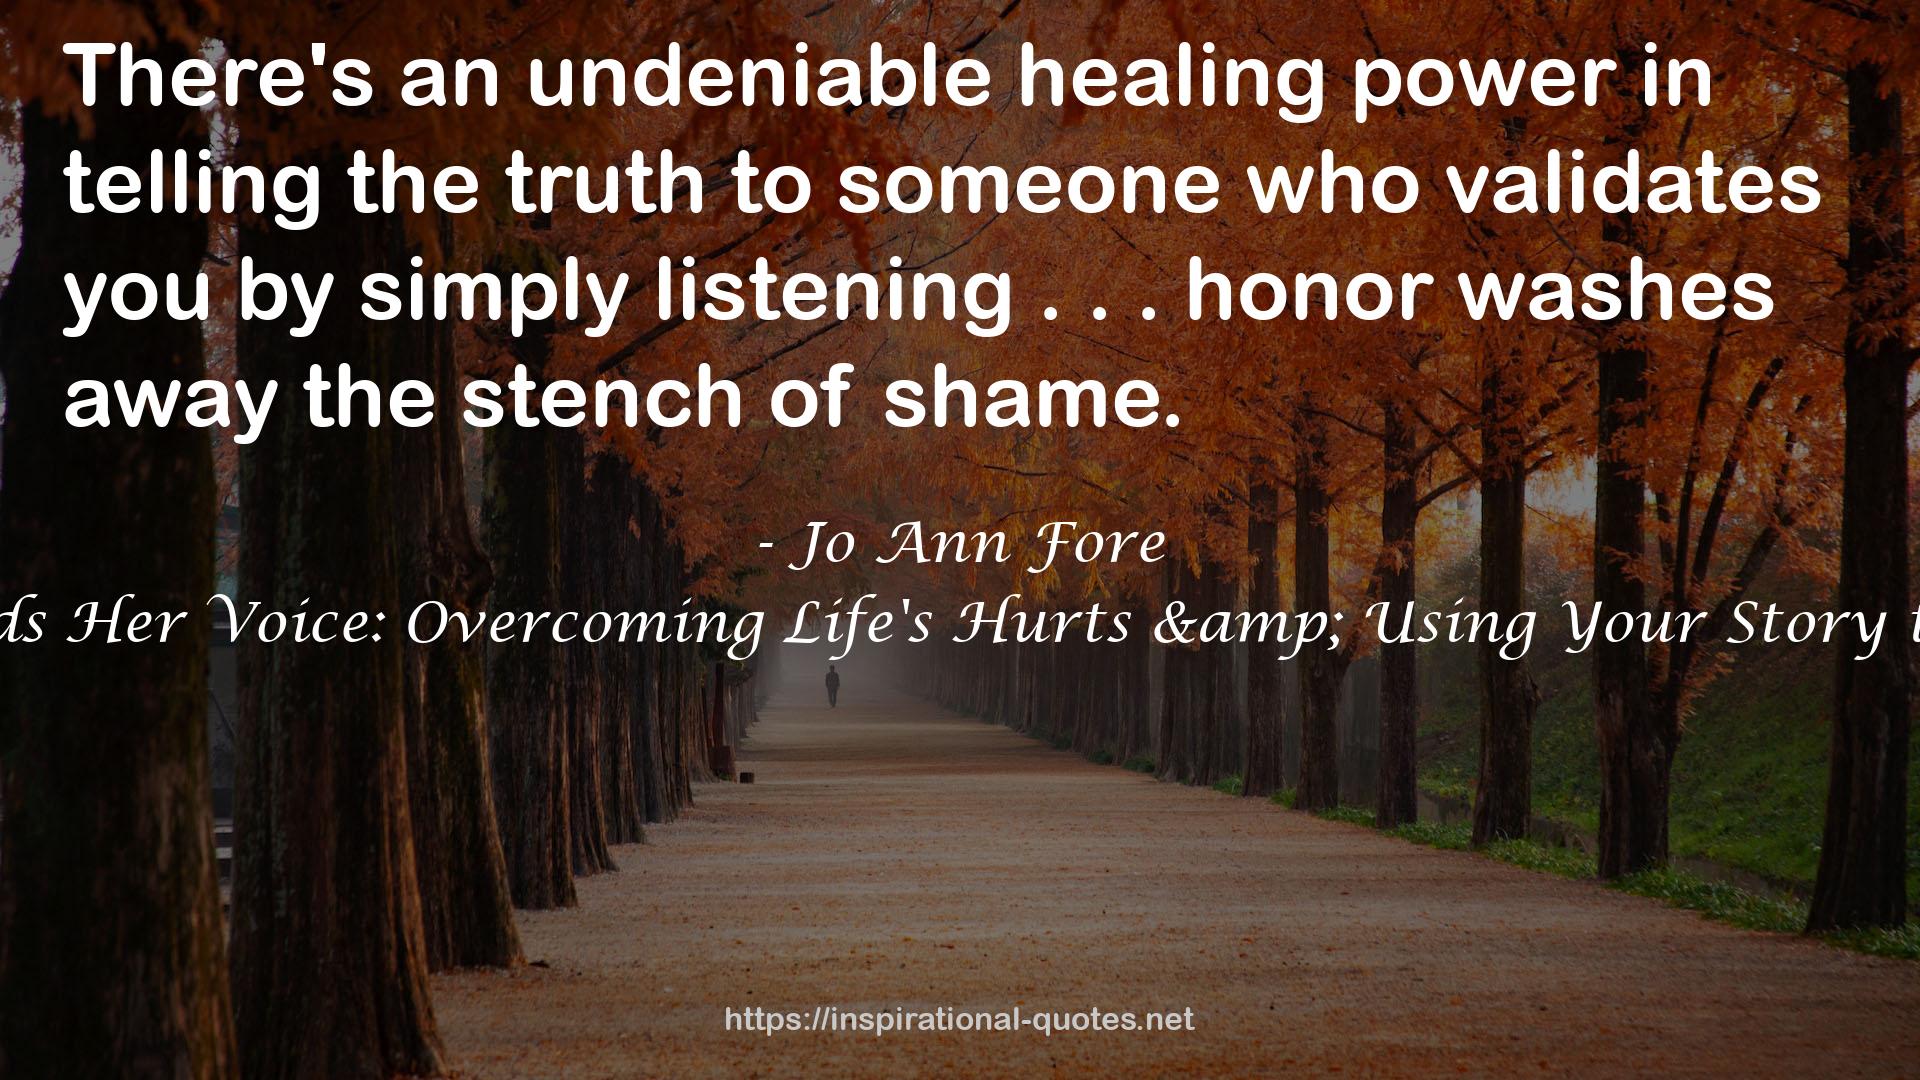 When a Woman Finds Her Voice: Overcoming Life's Hurts & Using Your Story to Make a Difference QUOTES